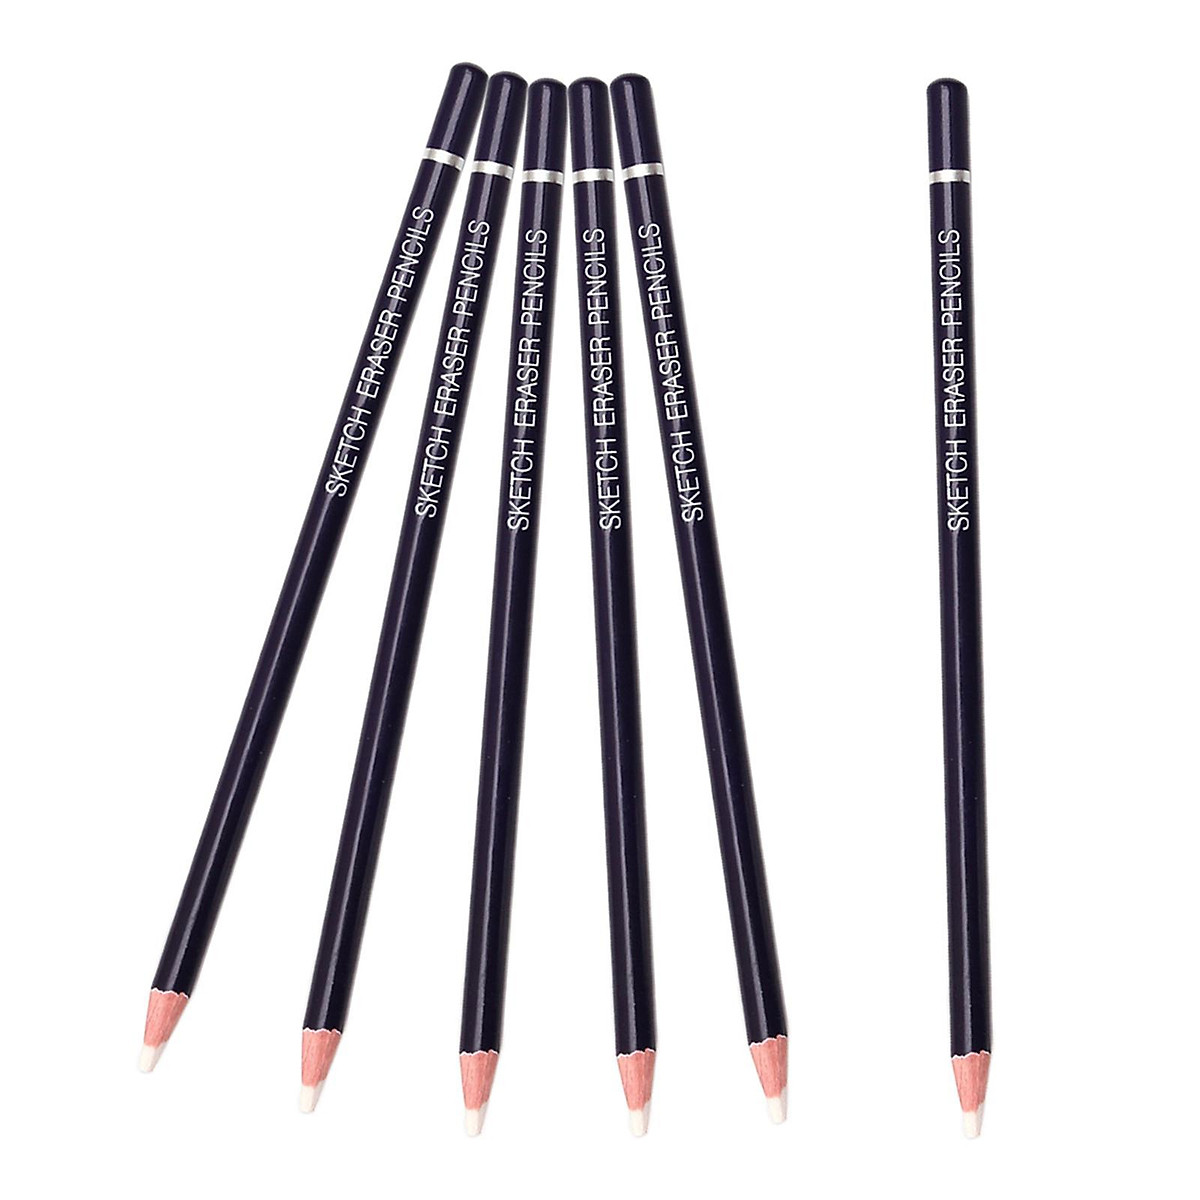 Marspark 13 Pieces Eraser Pencils with Sharpener Artist Eraser Pencil  Drawing Pen-Style Erasers for Drawing Sketch Painting Revise Details Pencil  Home School Office Use - Walmart.com